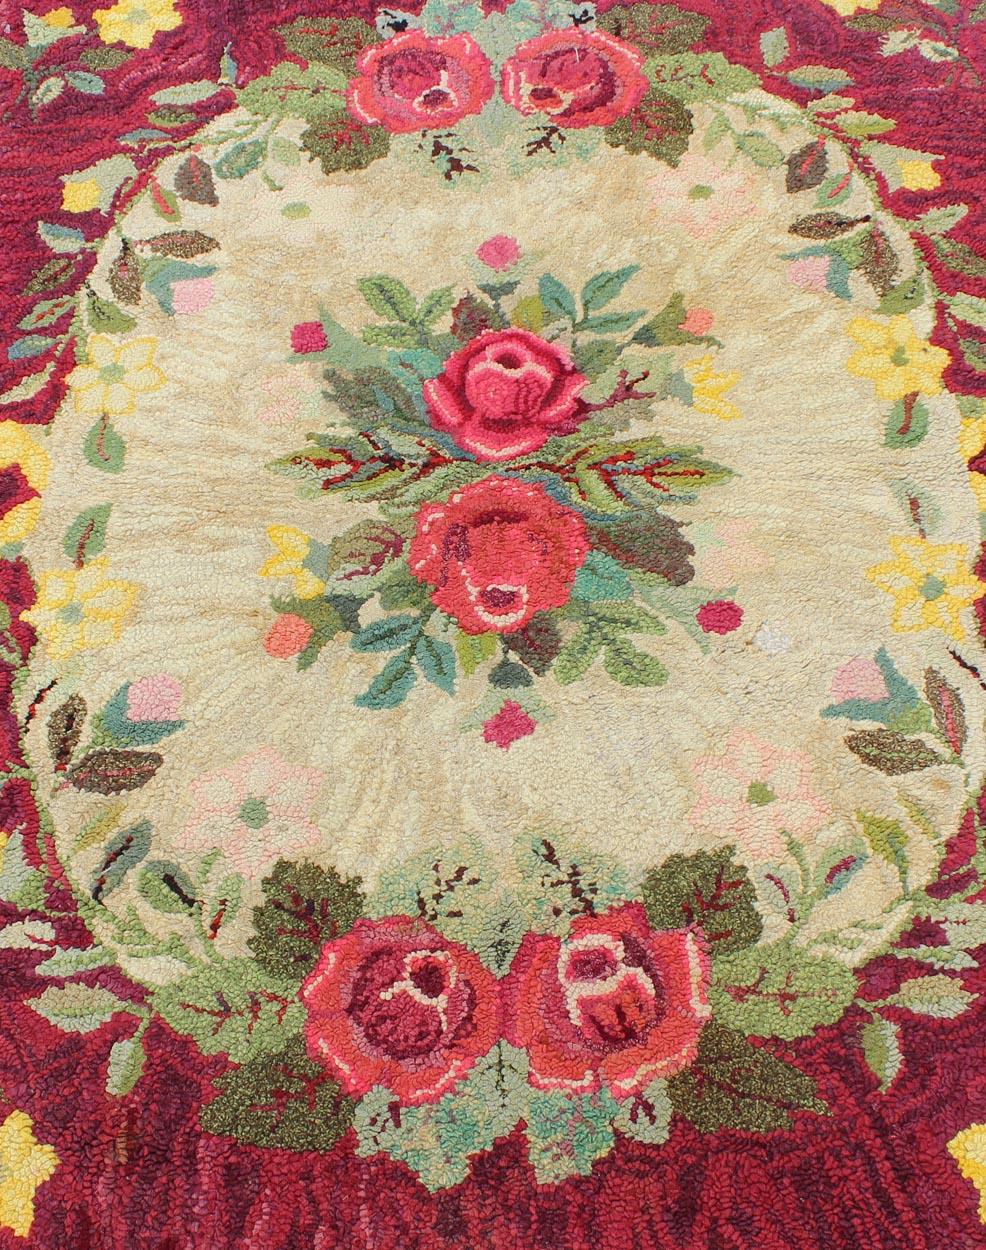 American Craftsman Vintage American Hooked Rug with Red Rose and Yellow Flower Bouquets For Sale